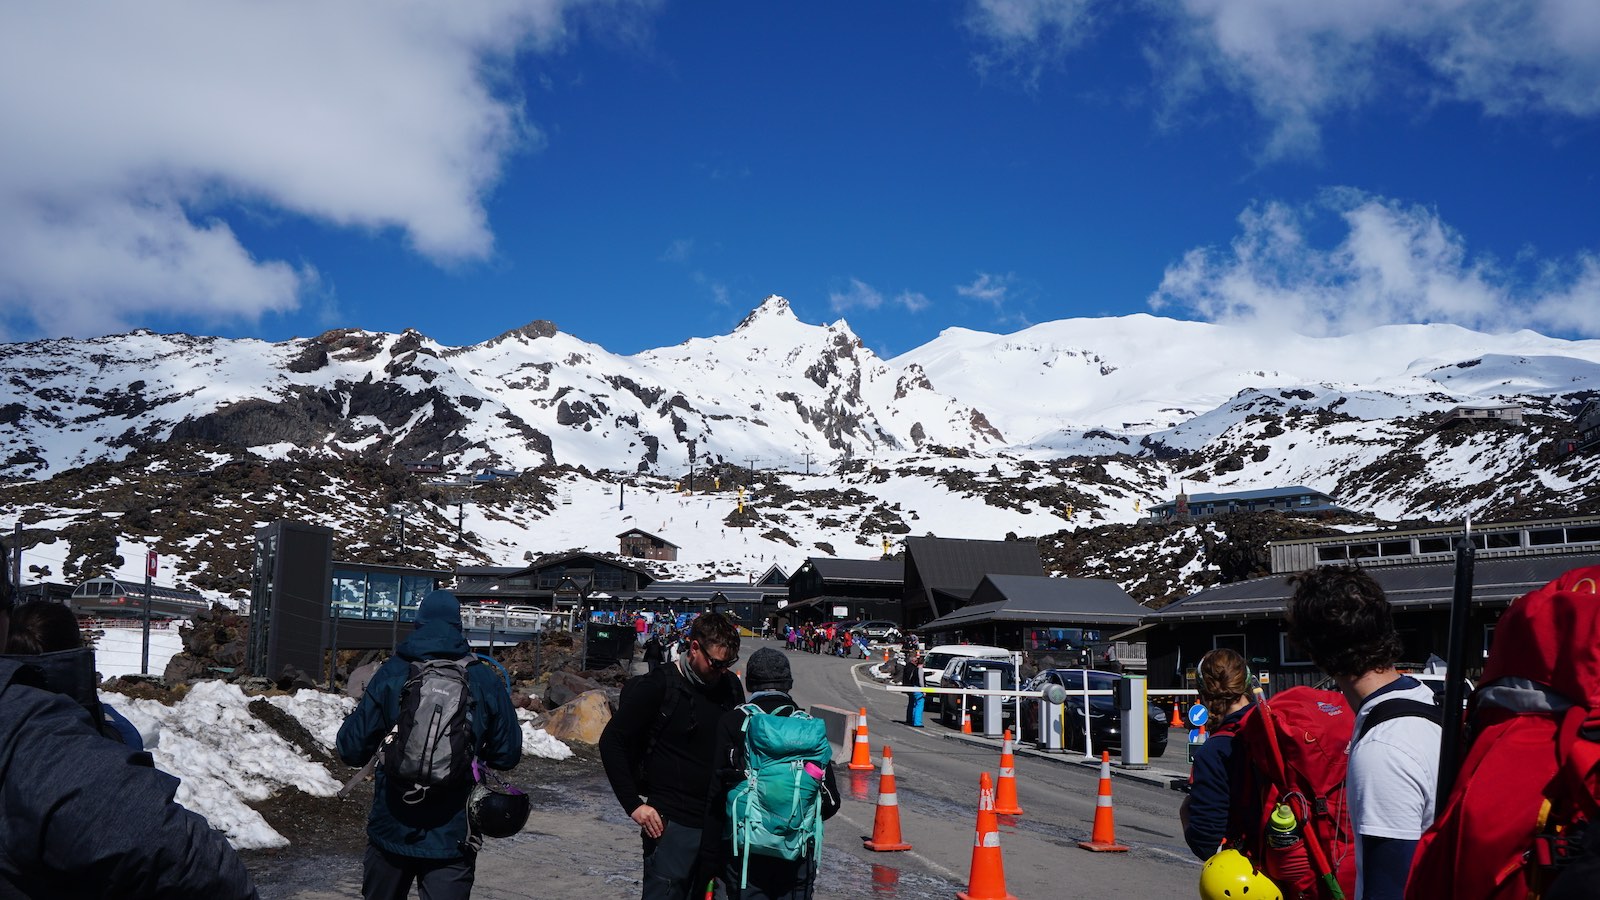 Mount Ruapehu is also home to a very popular ski resort, which is where we drove into to start the hike.